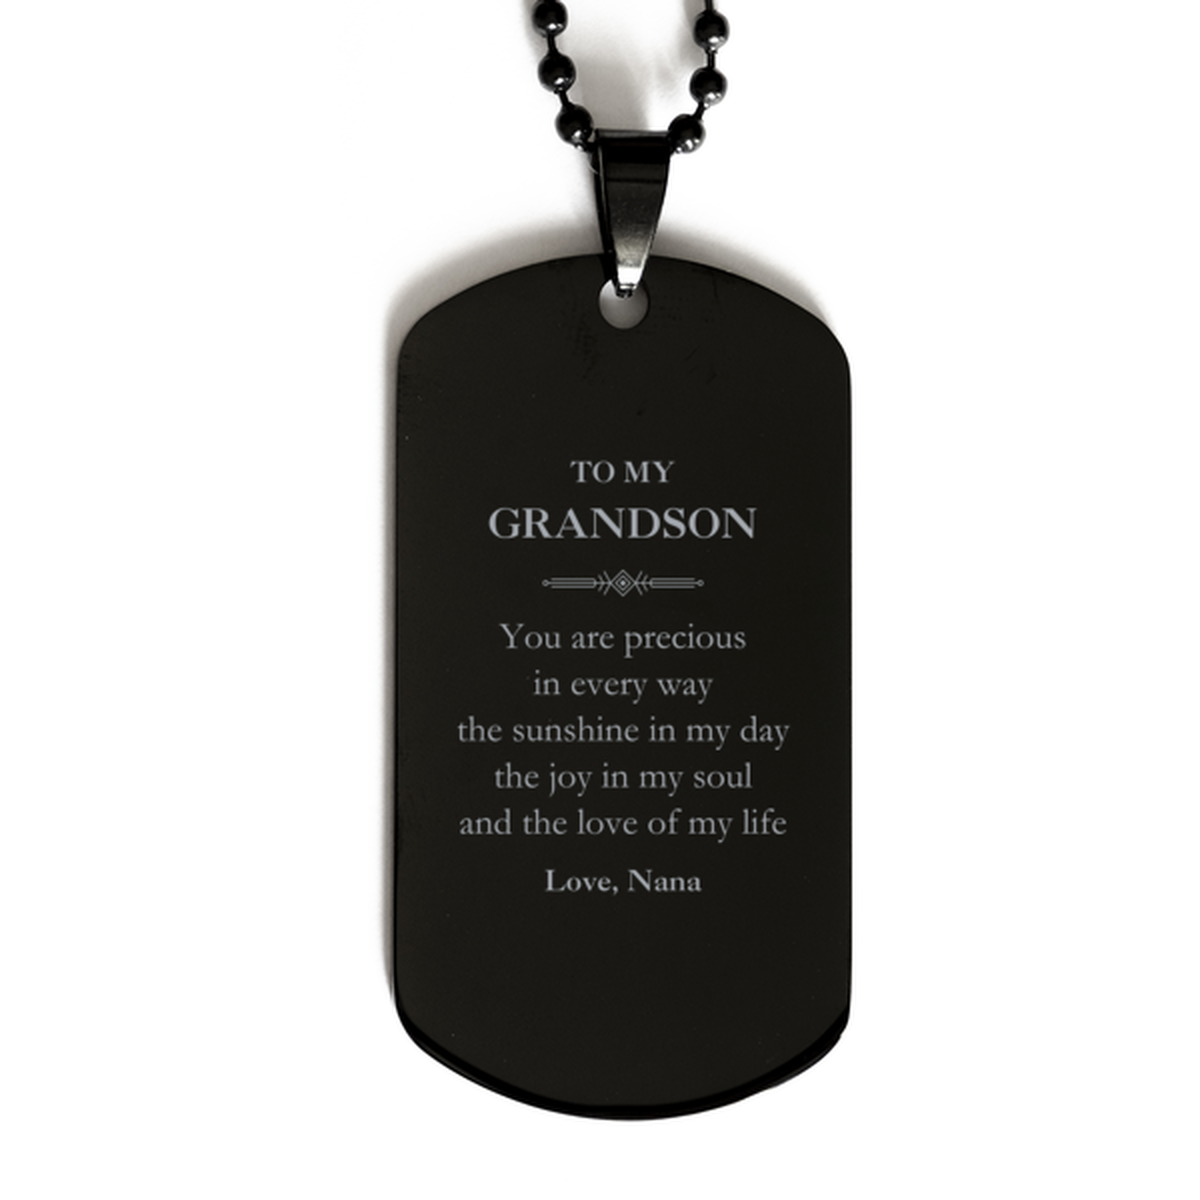 Graduation Gifts for Grandson Black Dog Tag Present from Nana, Christmas Grandson Birthday Gifts Grandson You are precious in every way the sunshine in my day. Love, Nana